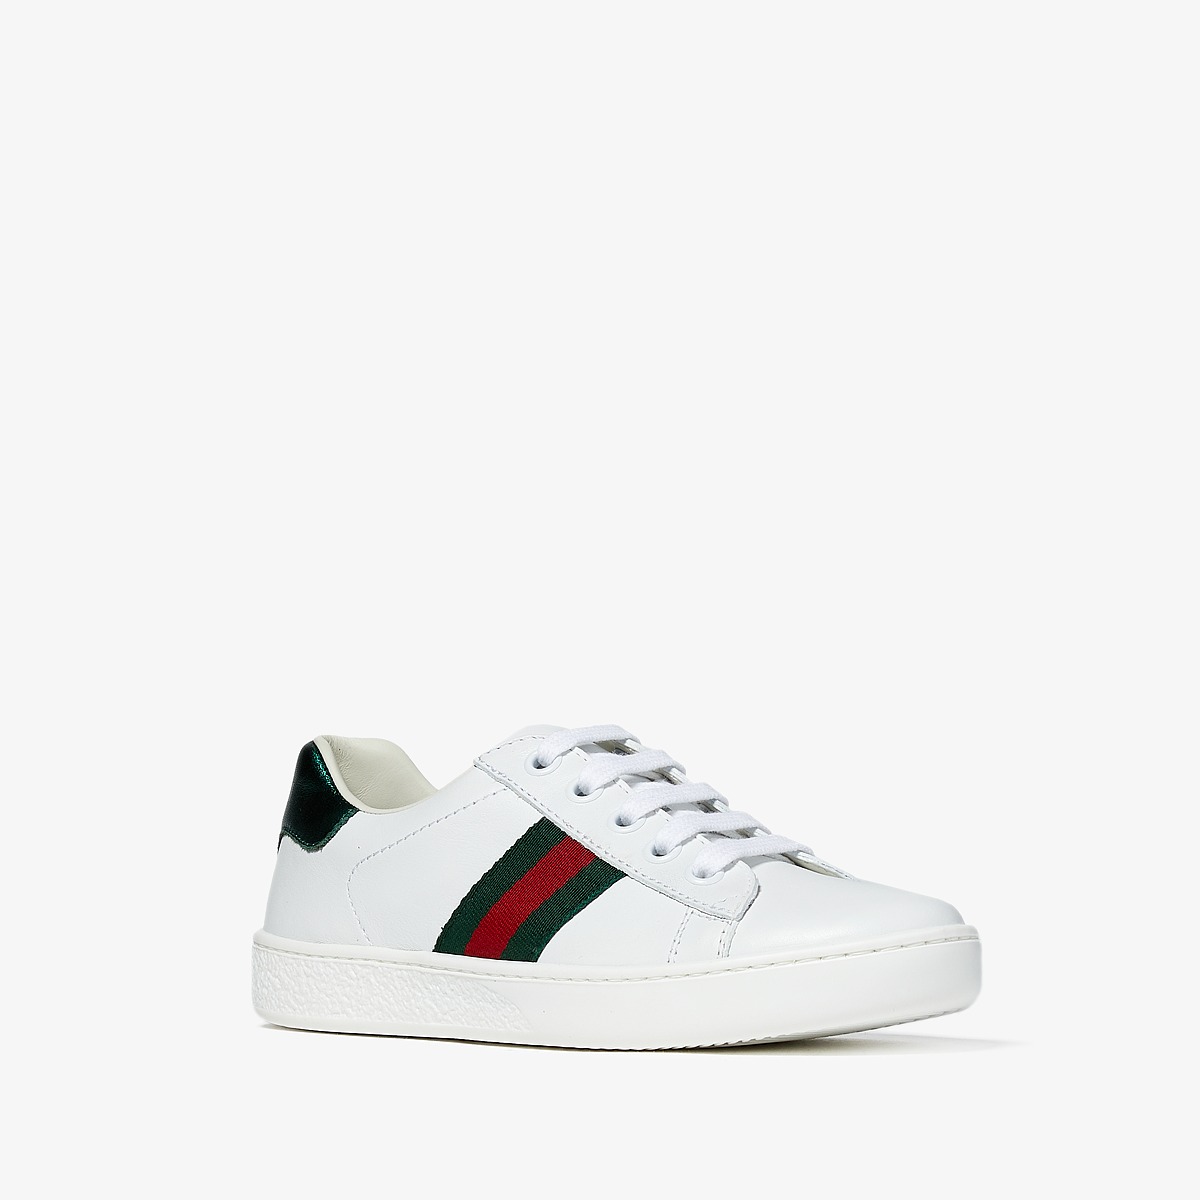 Gucci Kids New Ace Sneakers Little Kid